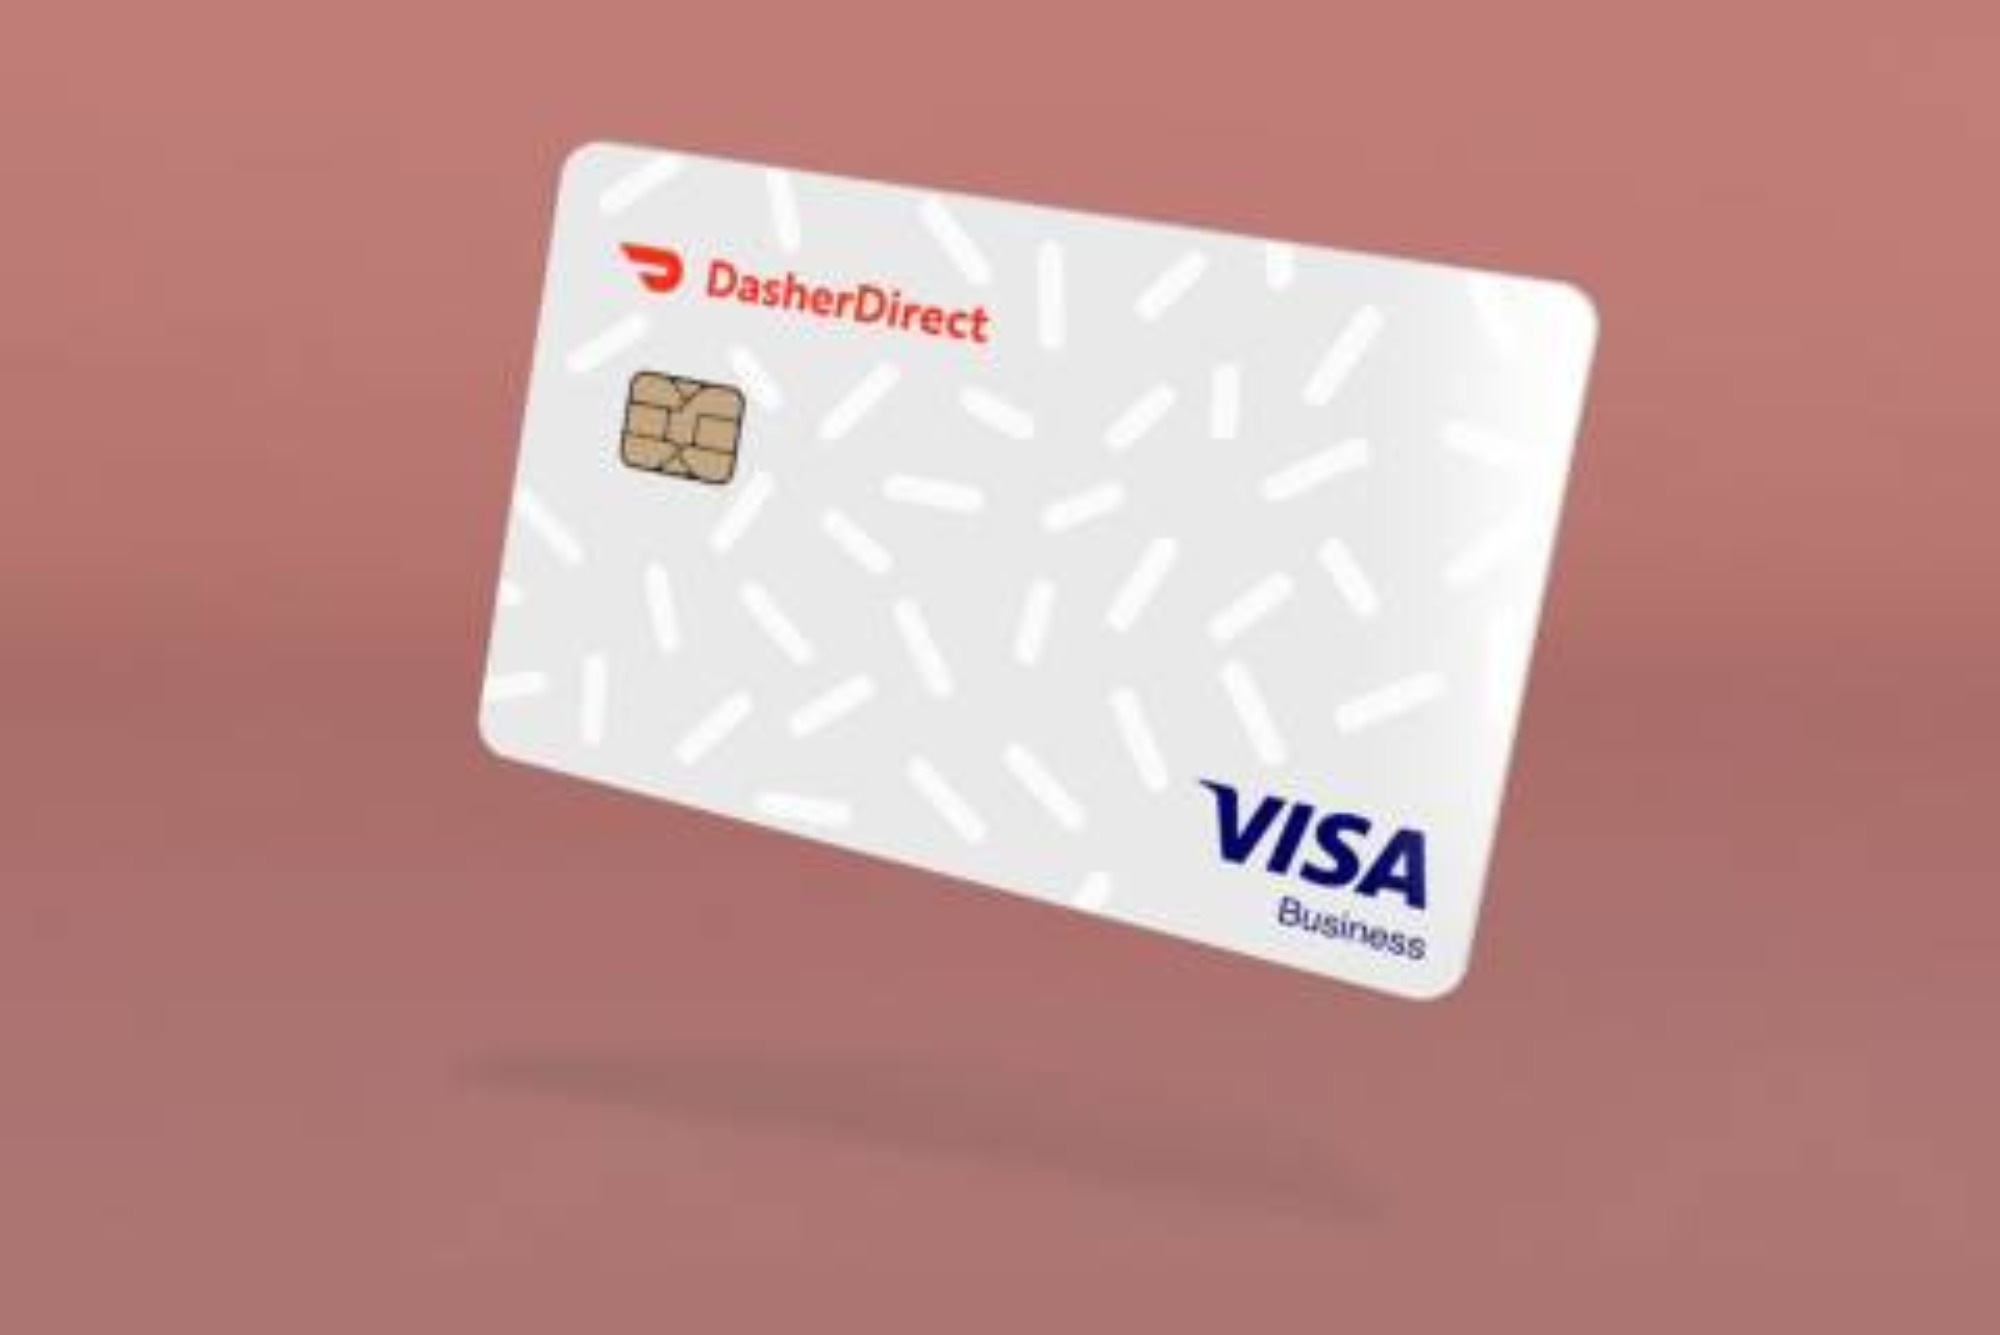 What ATM Can I Use My Dasher Direct Card